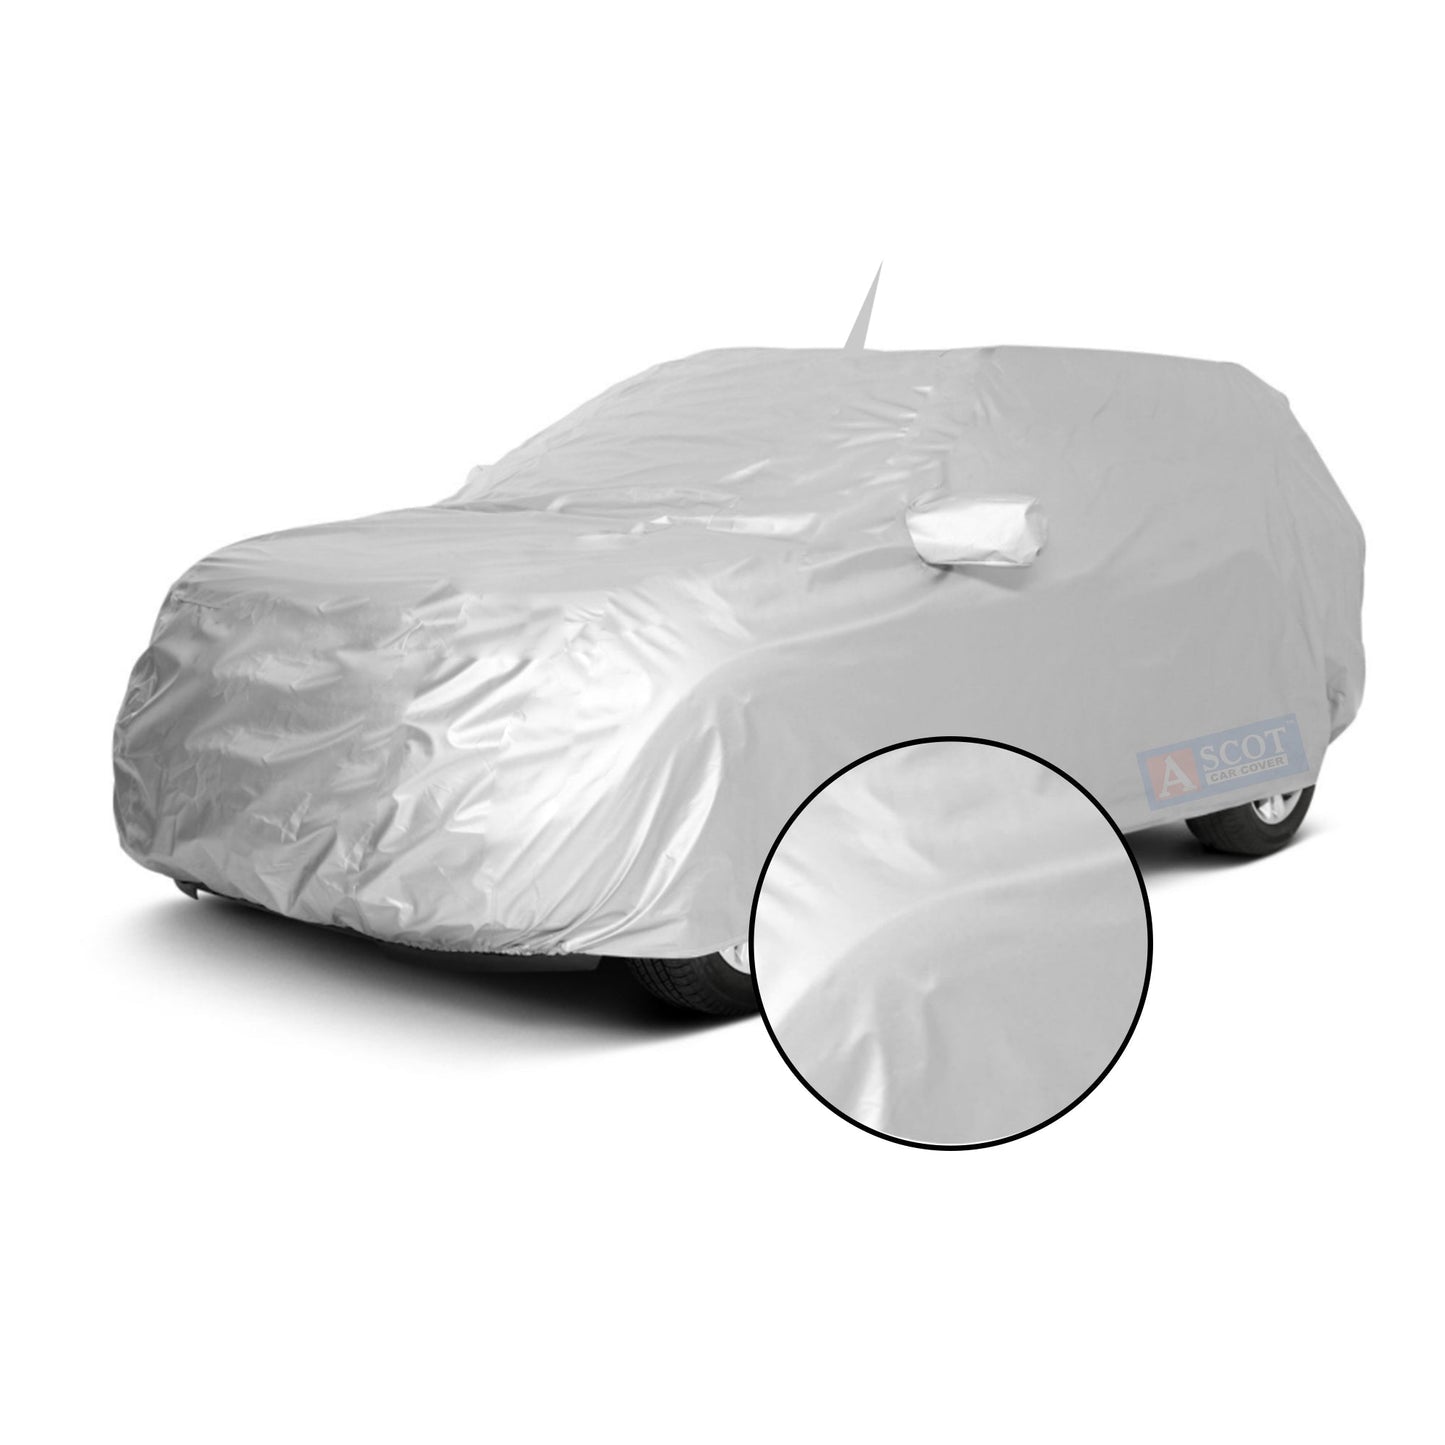 Ascot Kia Carens Car Body Cover Dust Proof, Trippel Stitched